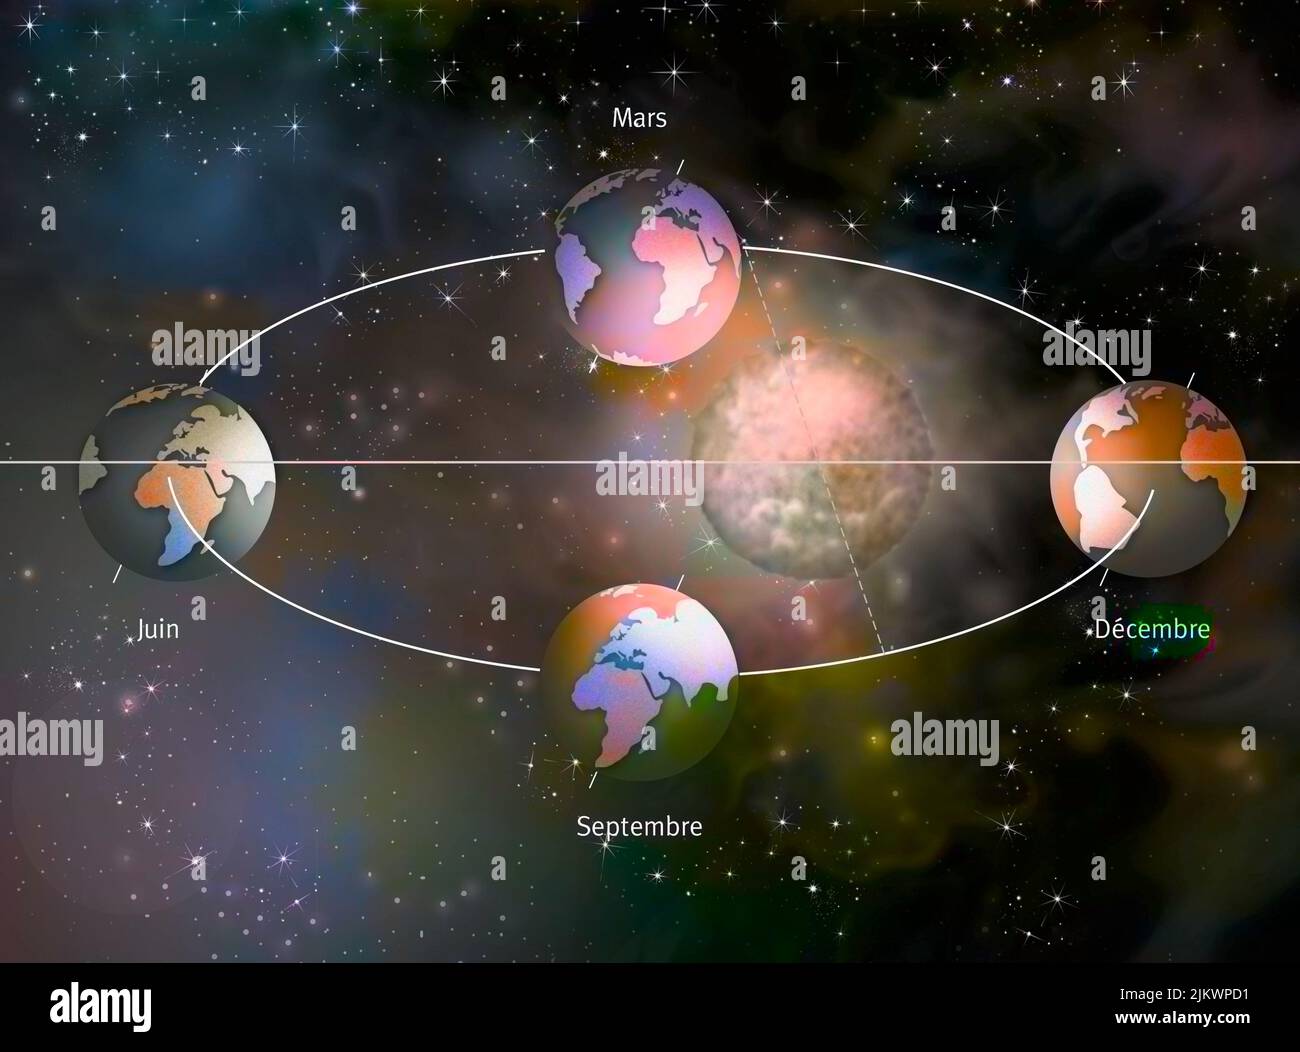 Positions of the Earth around the sun indicating the seasons. Stock Photo